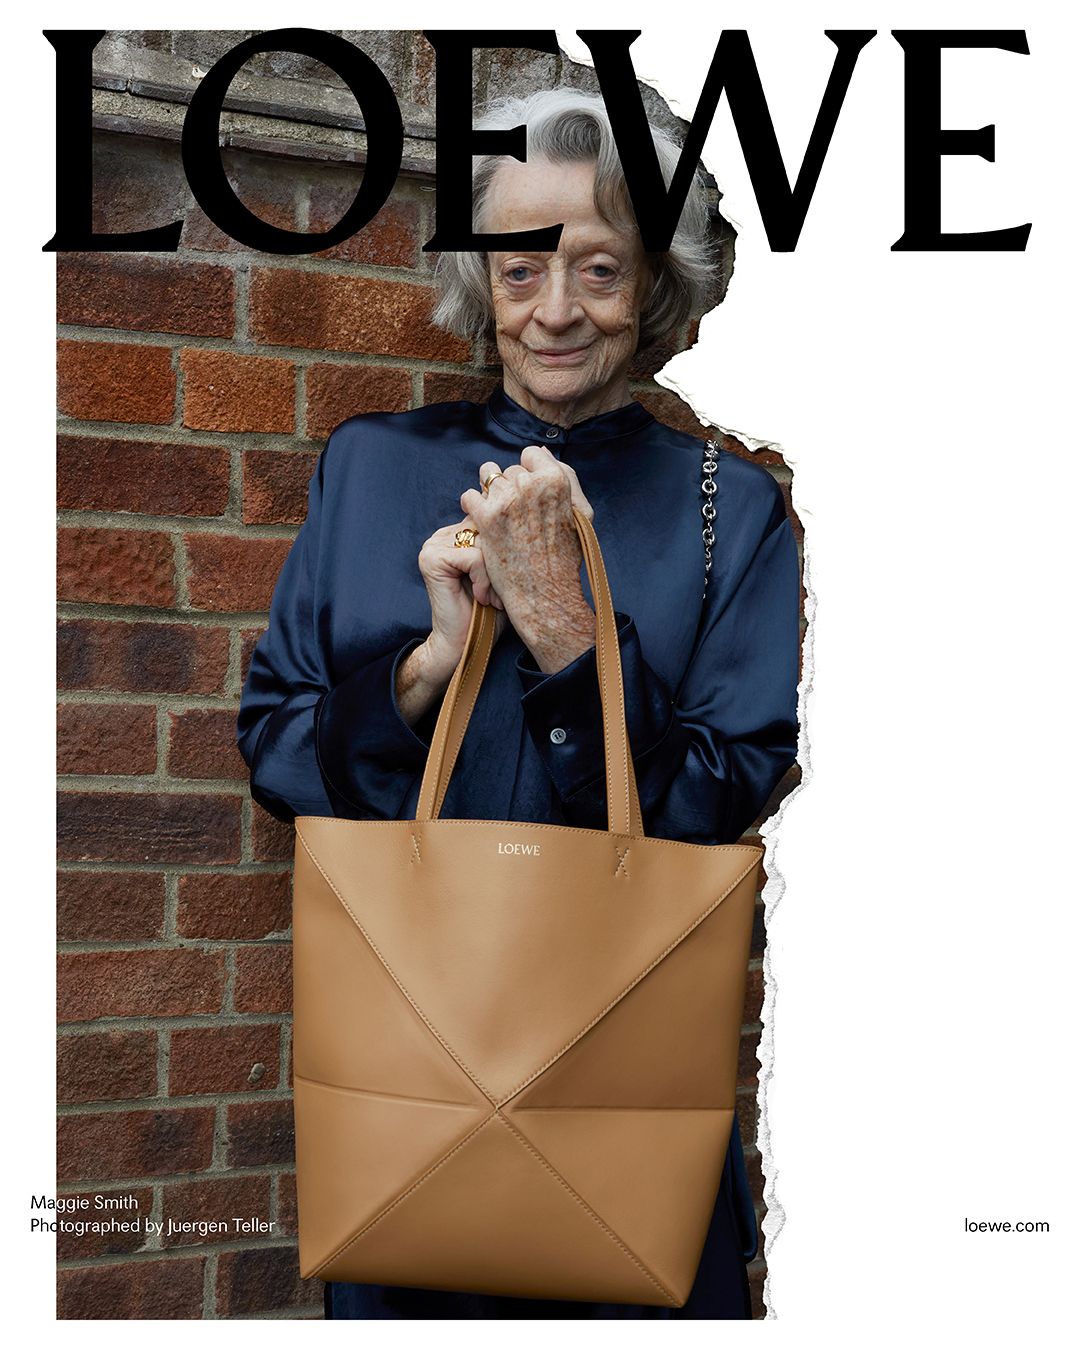 Latest found that convinced me that Loewe on the secondhand market